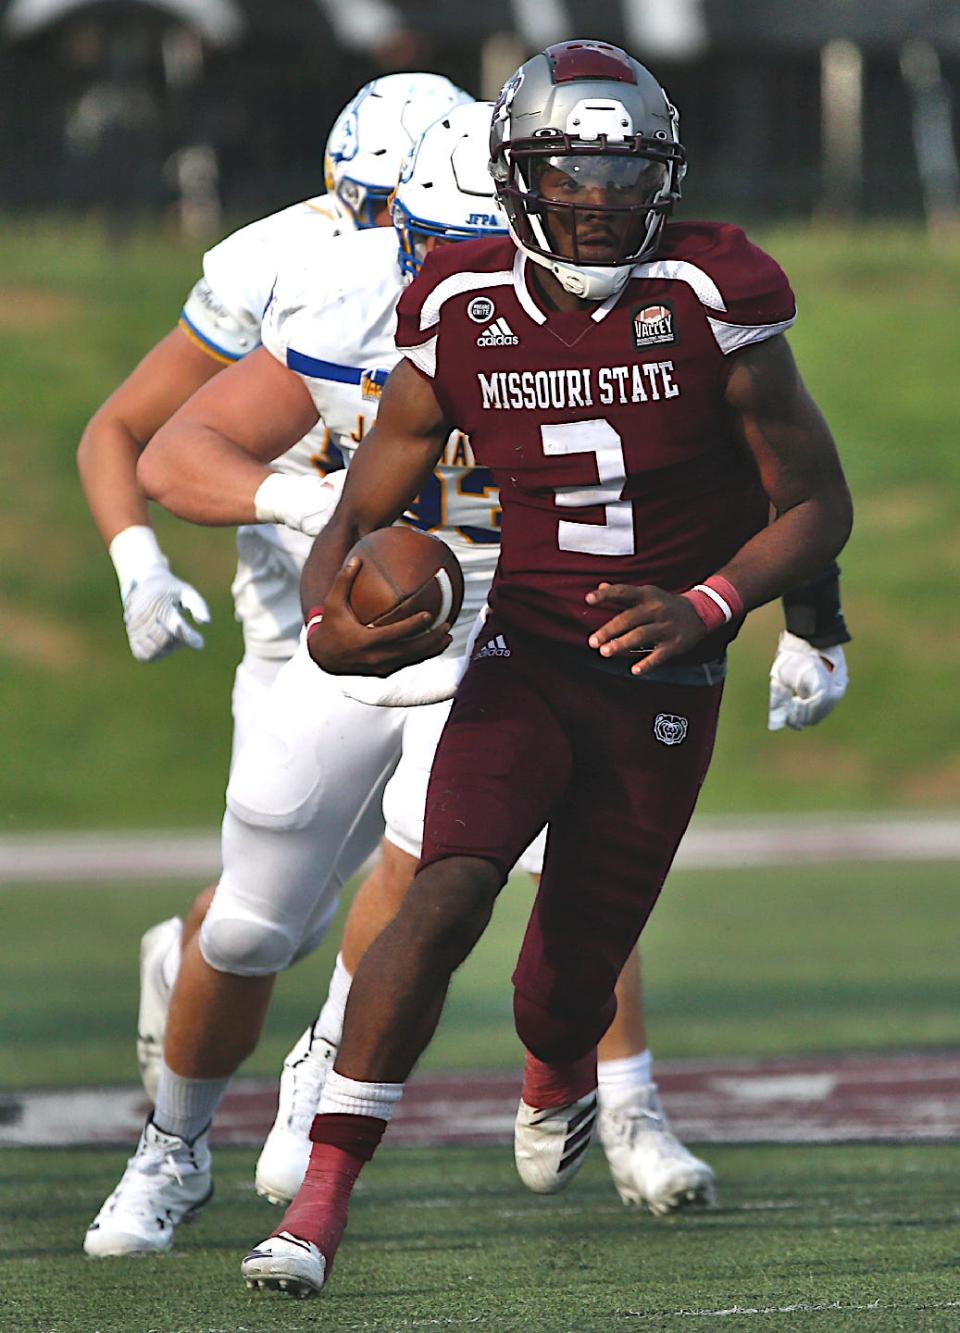 Jason Shelley, of Missouri State, during the Bears game against South Dakota State at Plaster Stadium on Saturday, Sep. 24, 2022.